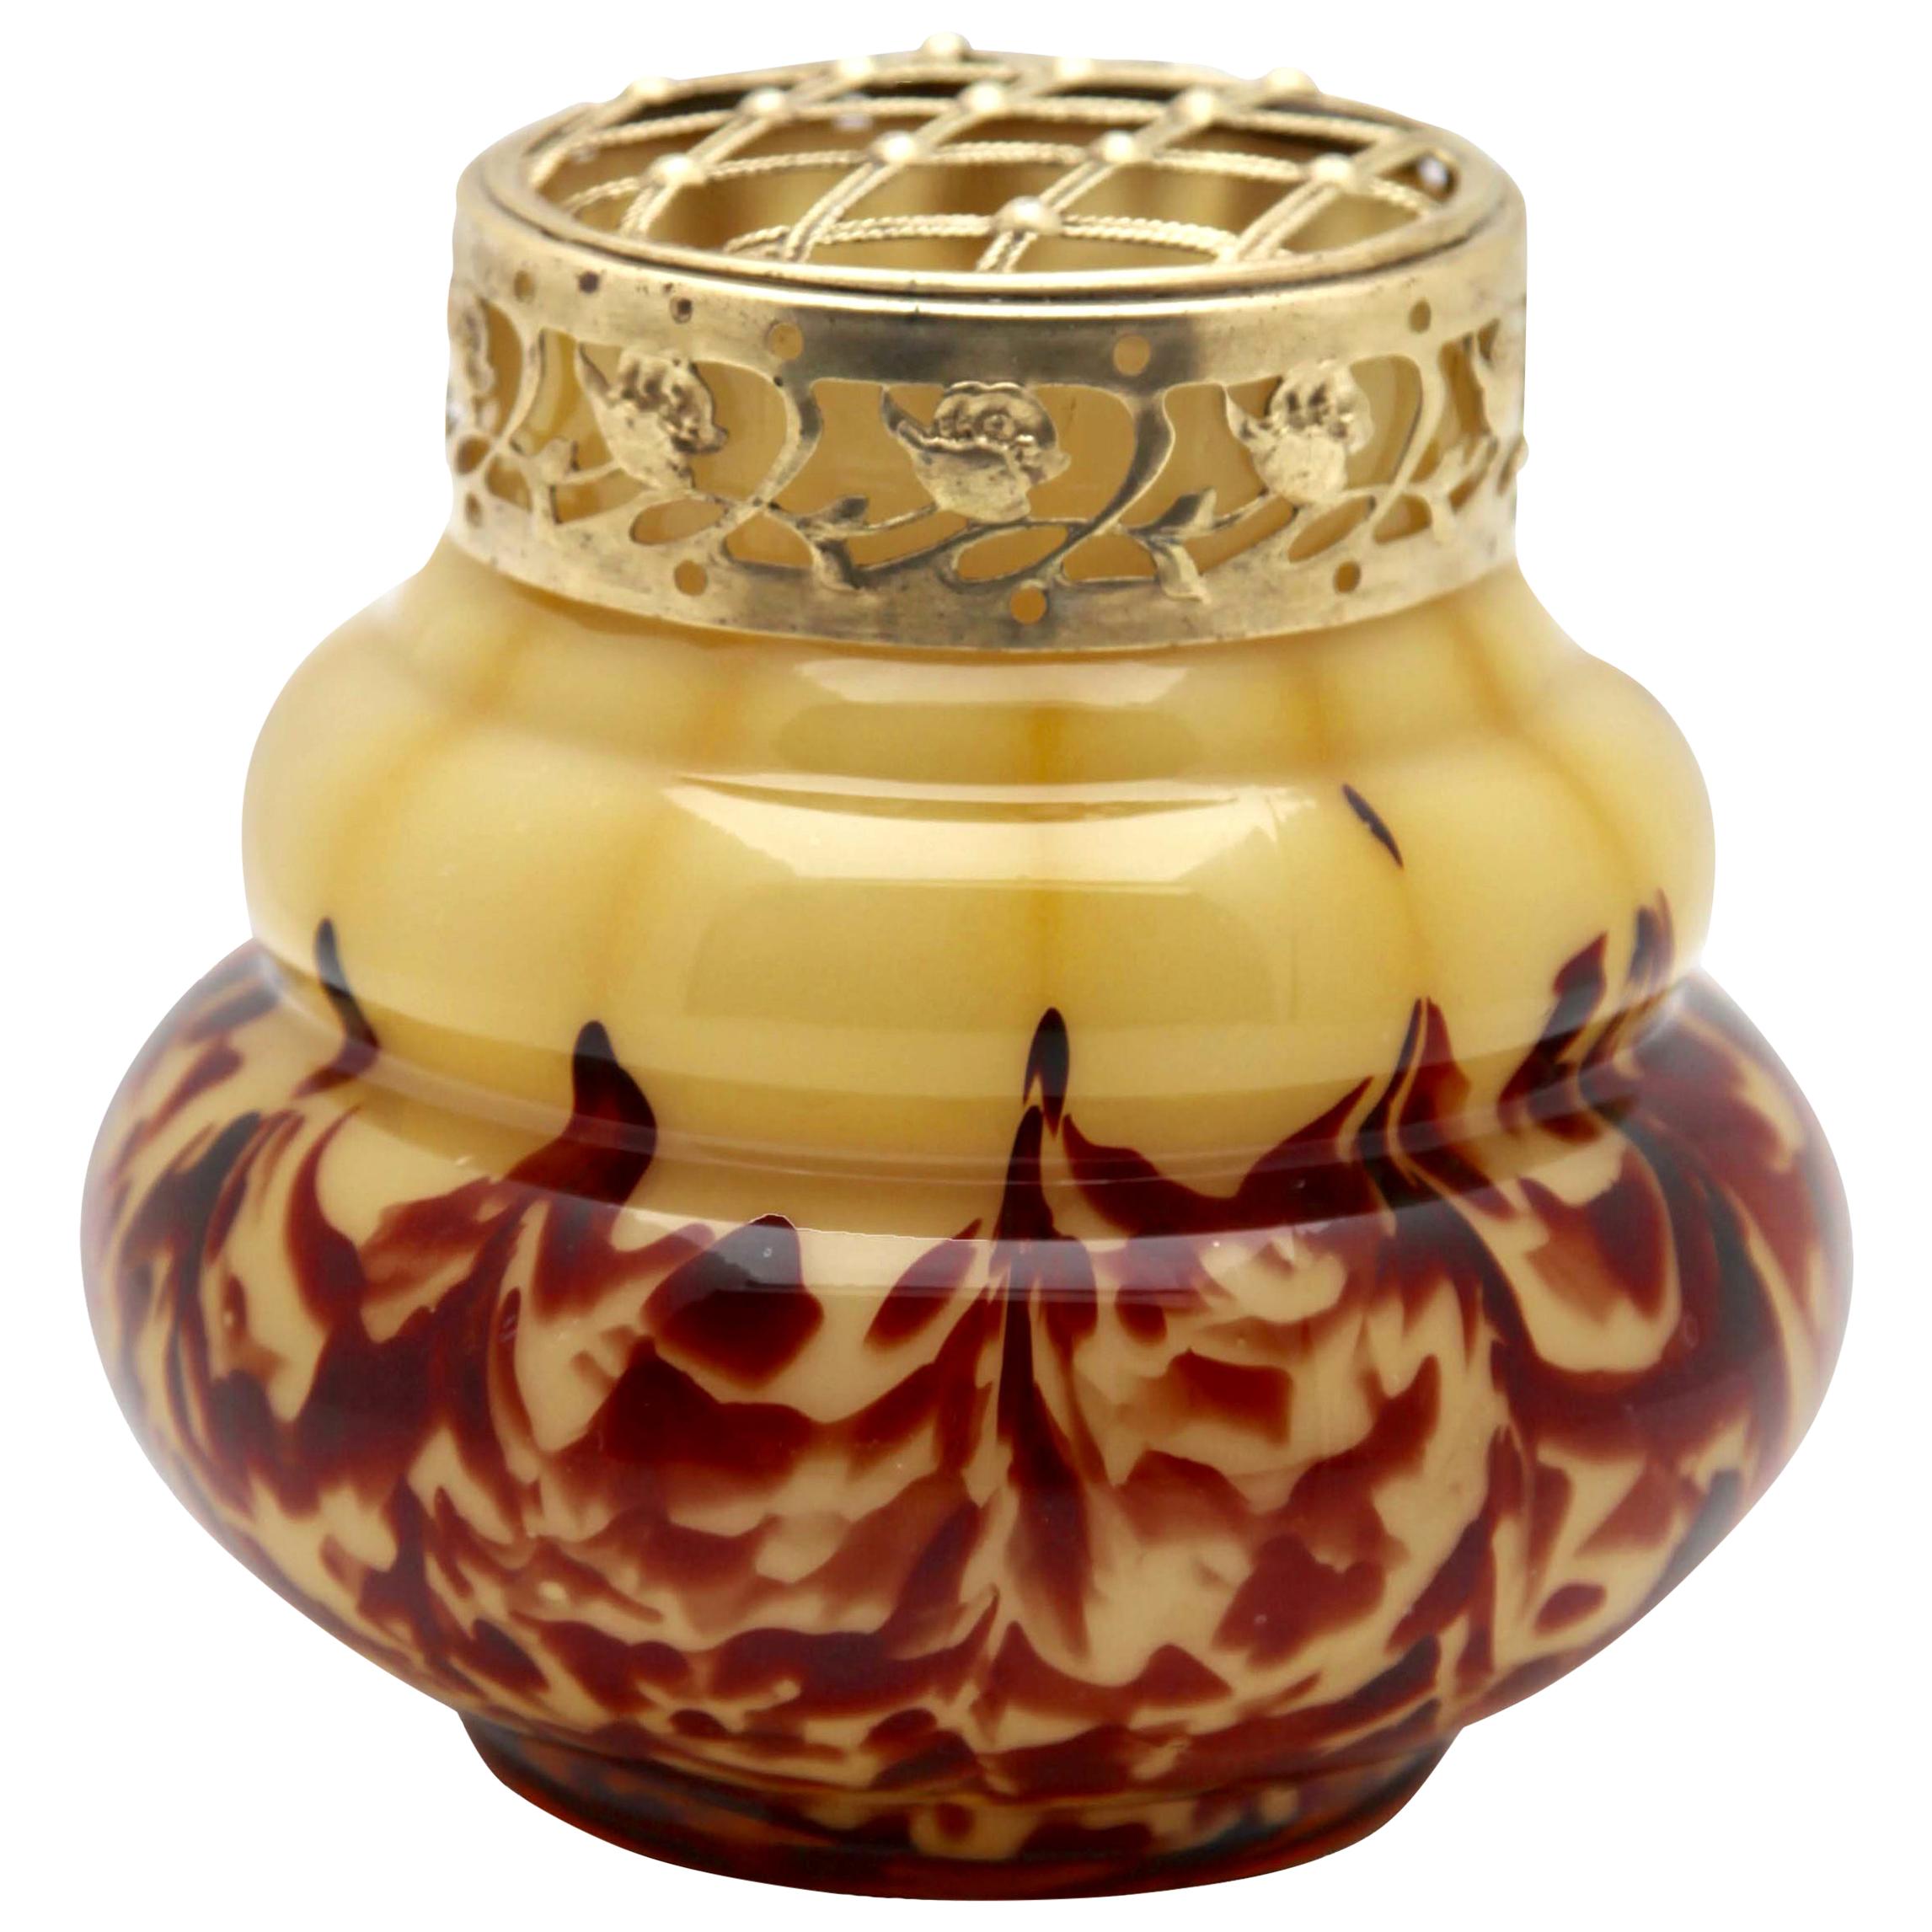 'Pique Fleurs' Vase, with 'Coffee and Caramel' Decor, with Grille, Late 1930s